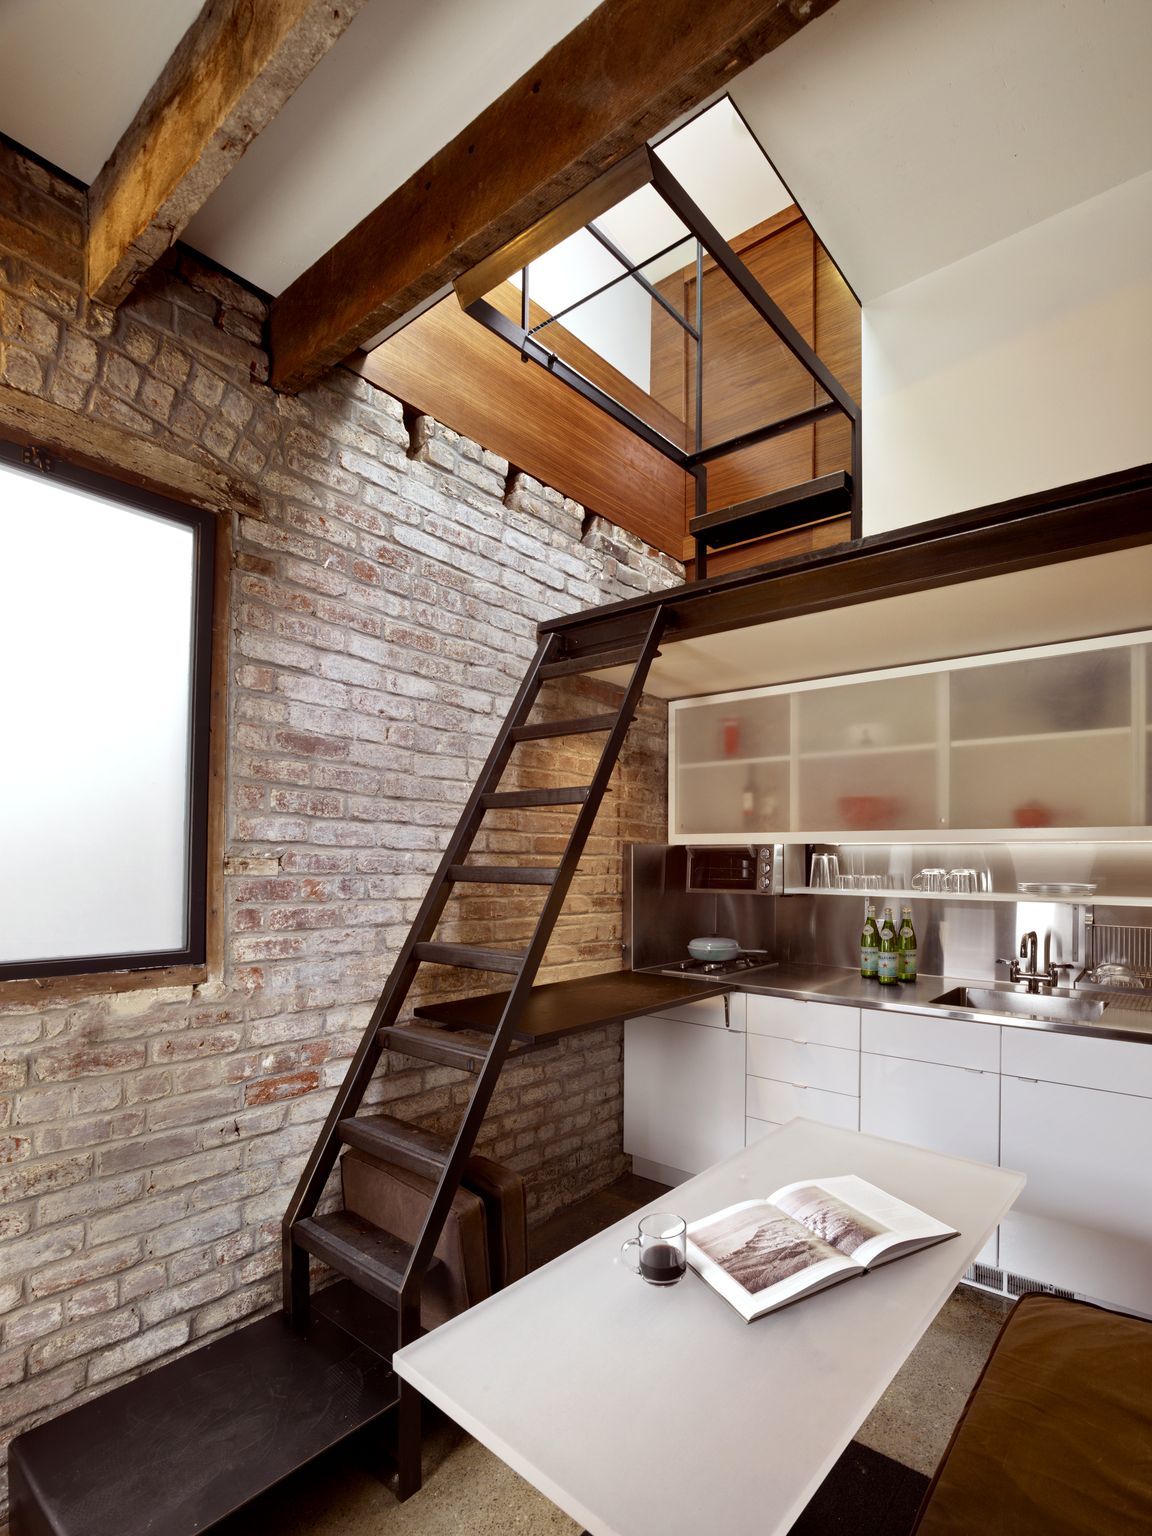 Boiler room in San Francisco Converted into a Tiny House by Christi Azevedo